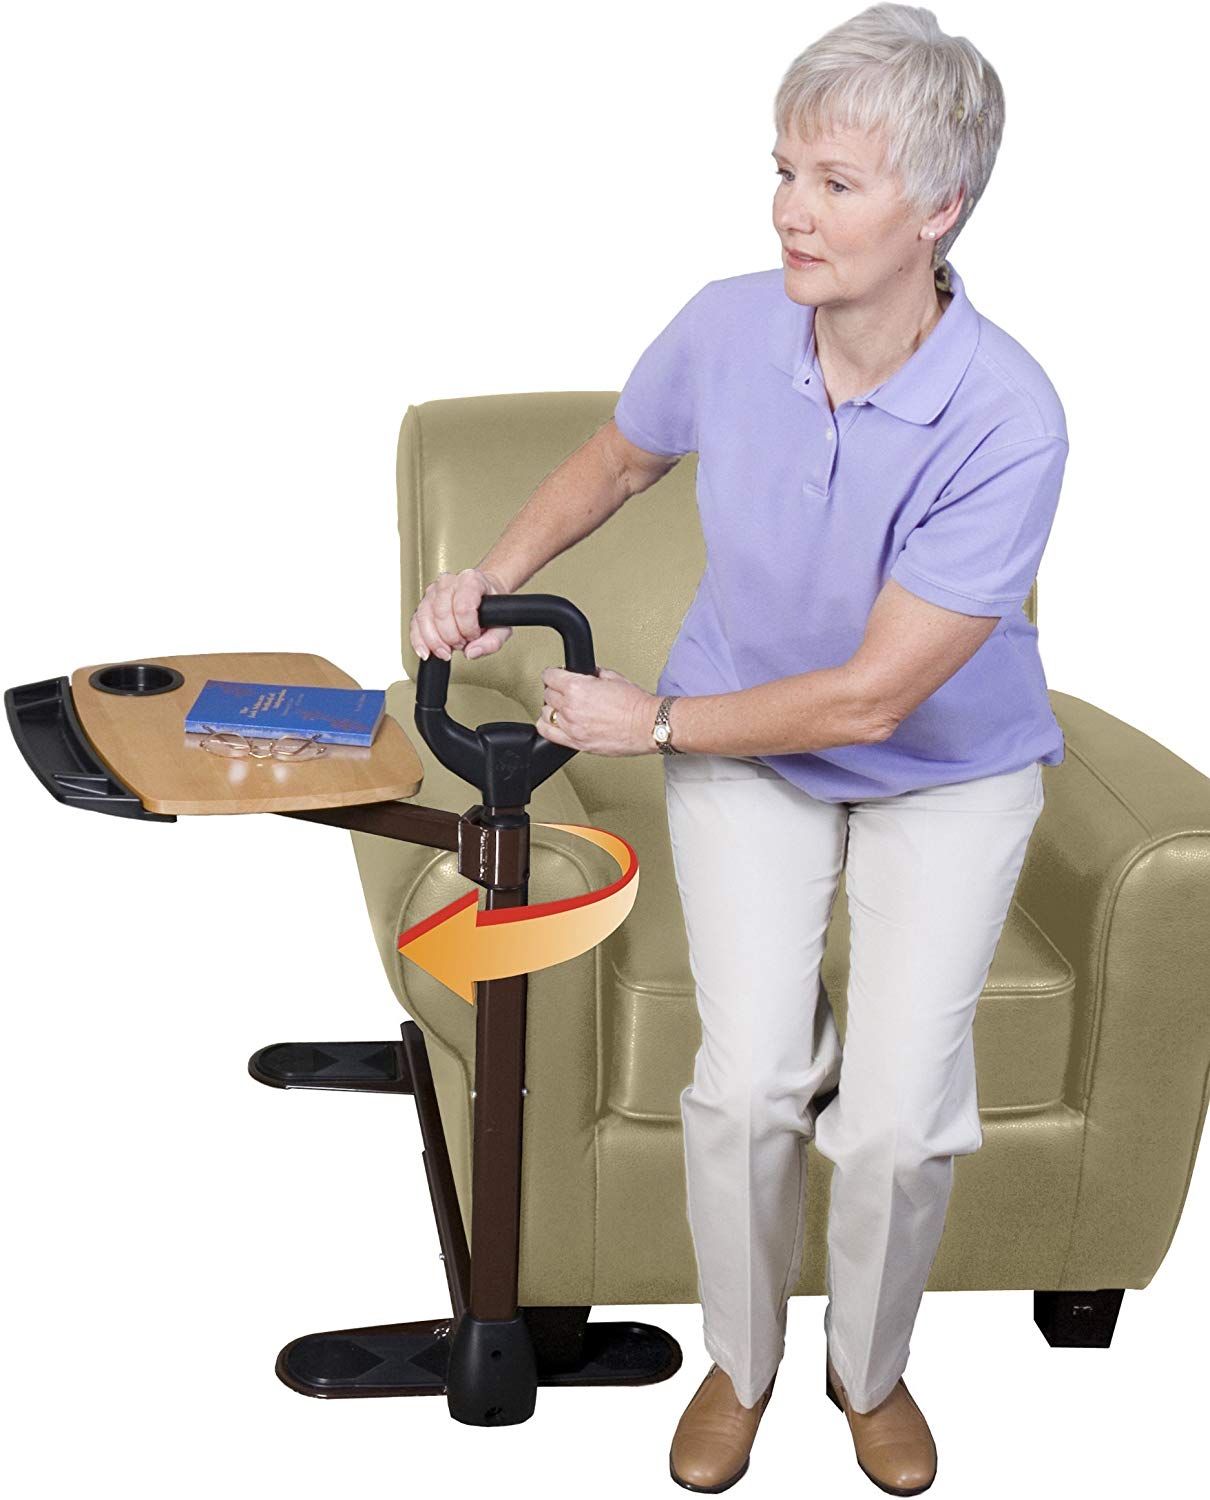 Review of Able Life Able Tray Table, with Ergonomic Stand Assist Safety Handle, Independent Living Aid